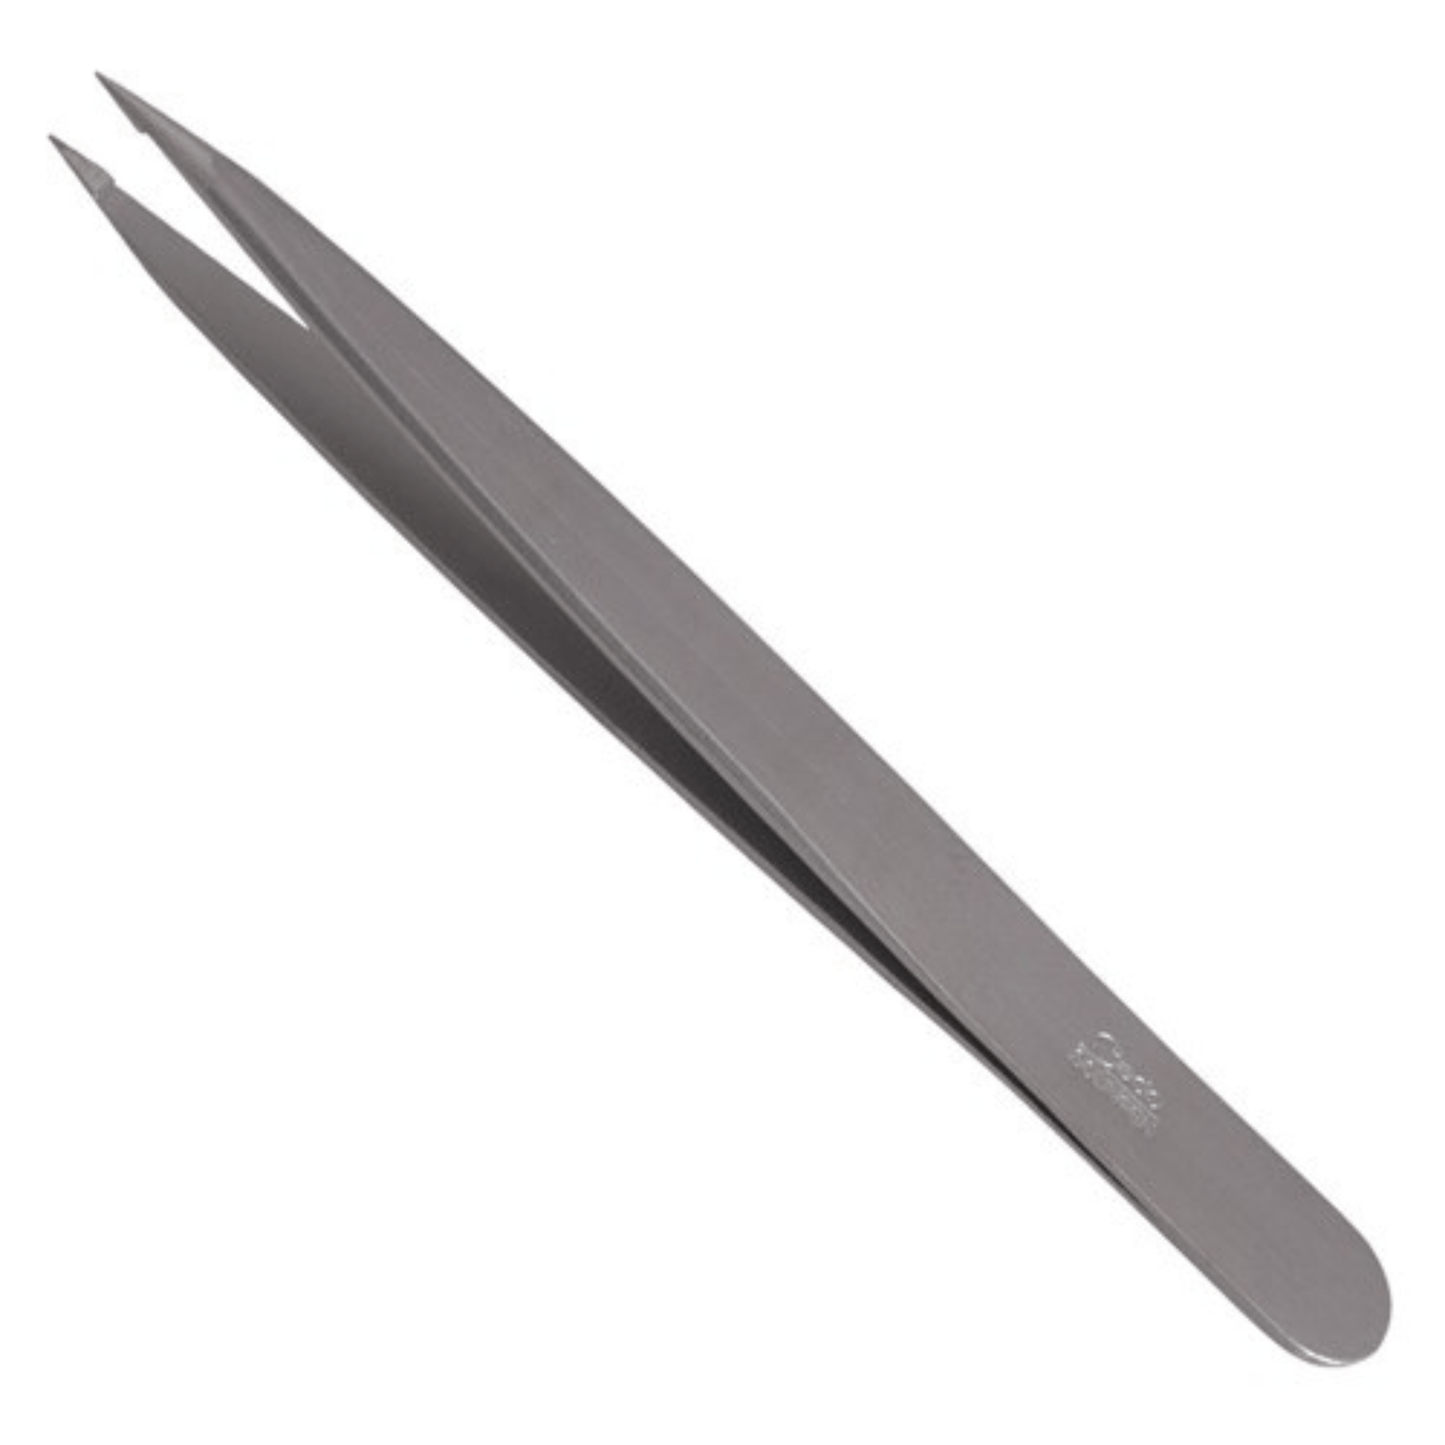 Primary Image of Stainless Steel Pointed Tweezers 9.5cm